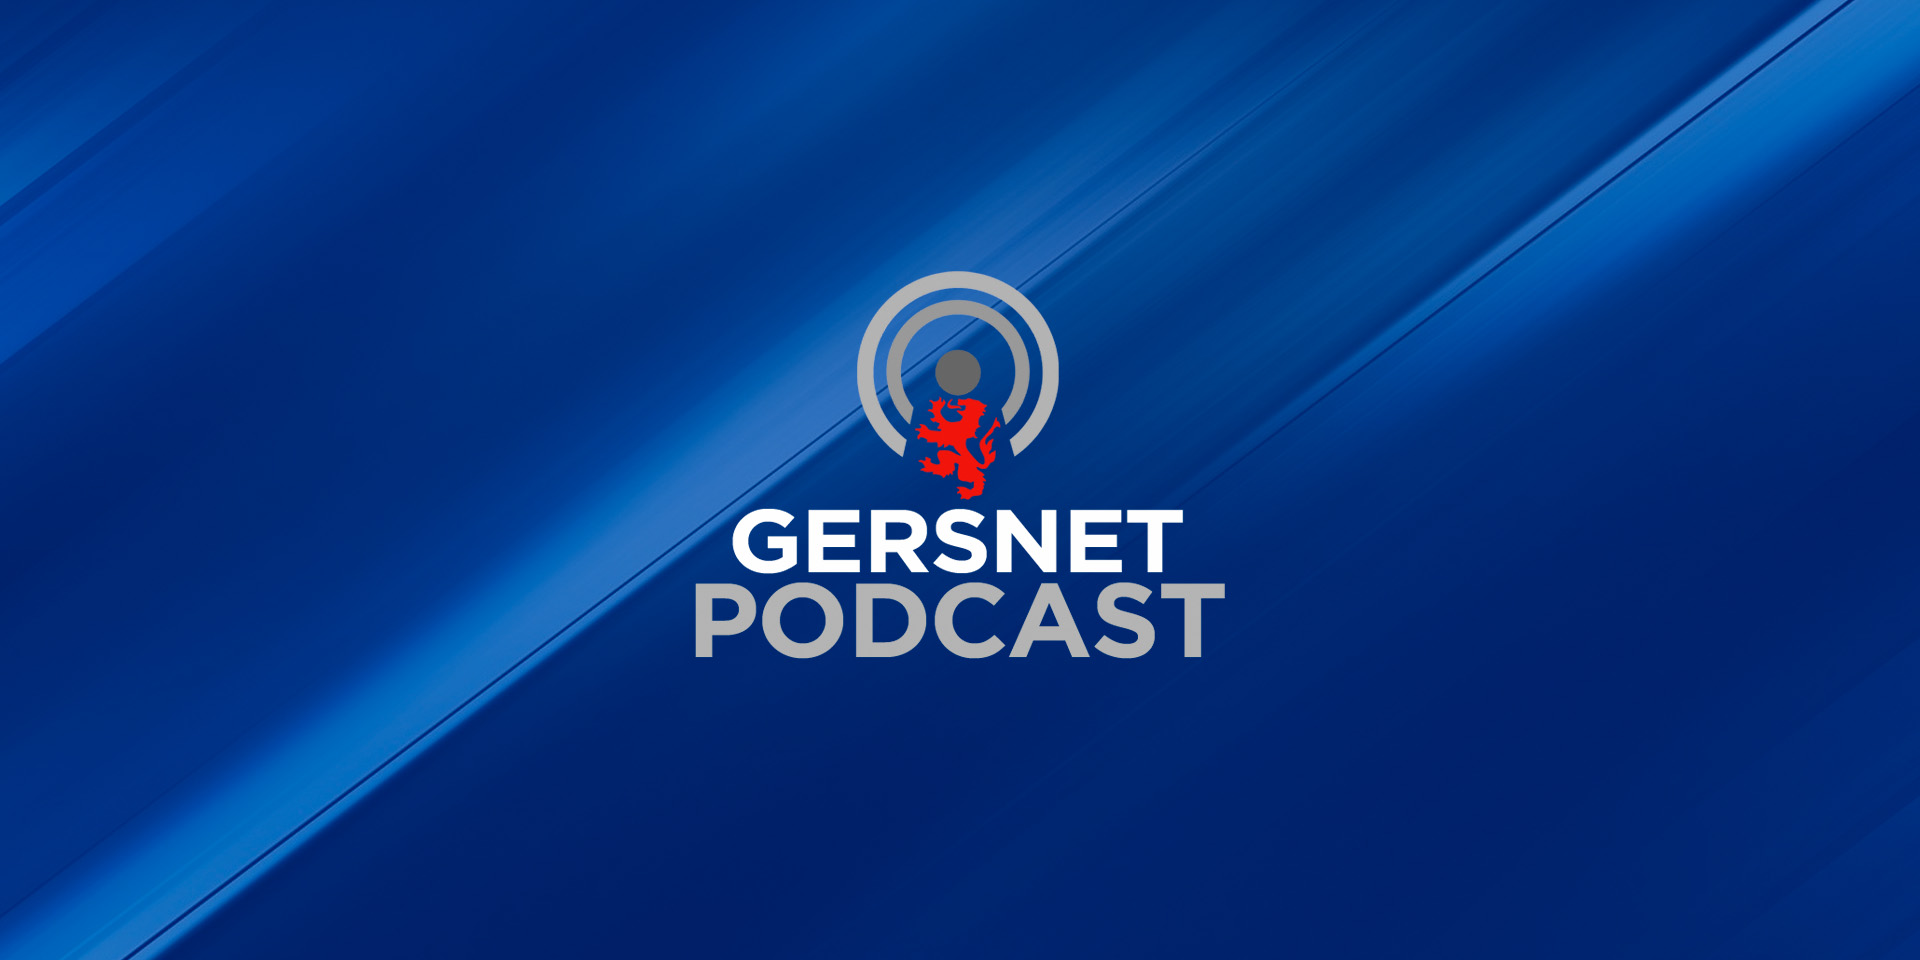 Gersnet Podcast 340 - A cup final calamity